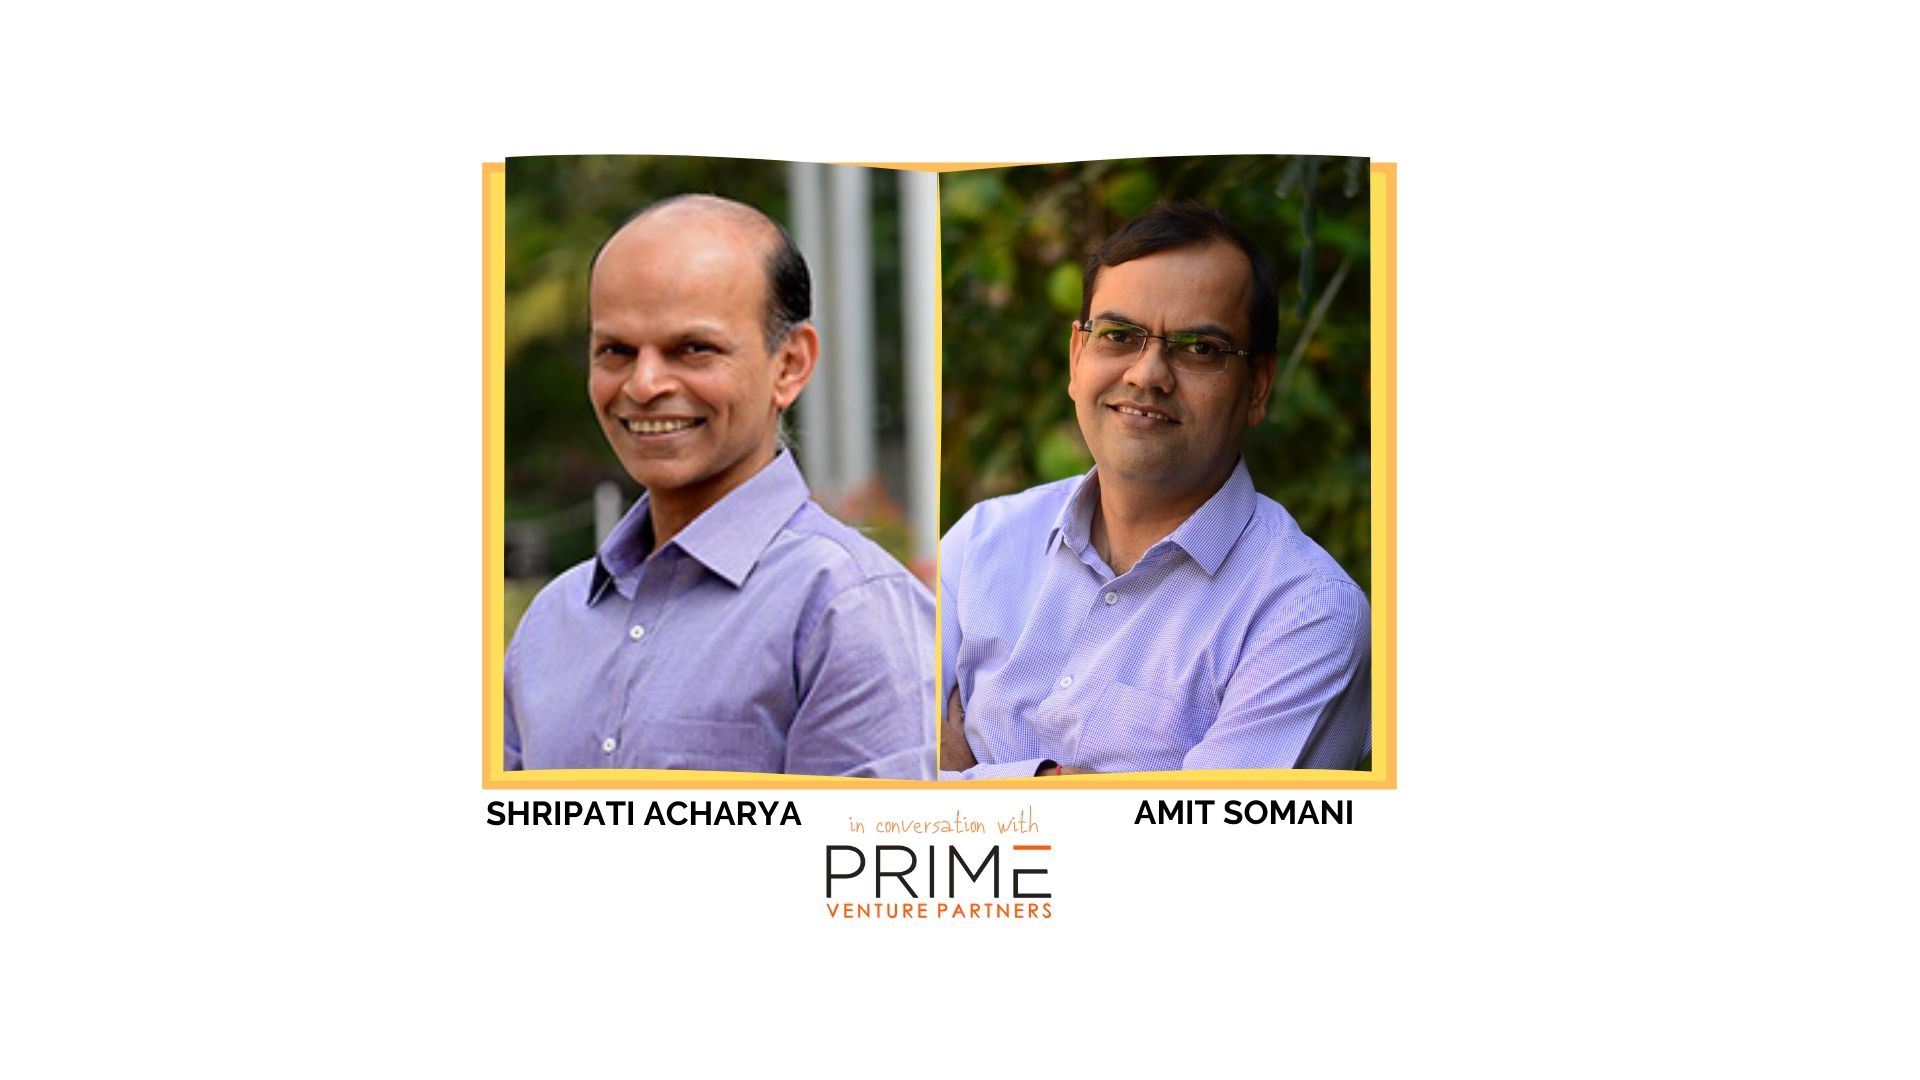 A graphic with guest(Shripati Acharya) and host's (Amit Somani) name and image.